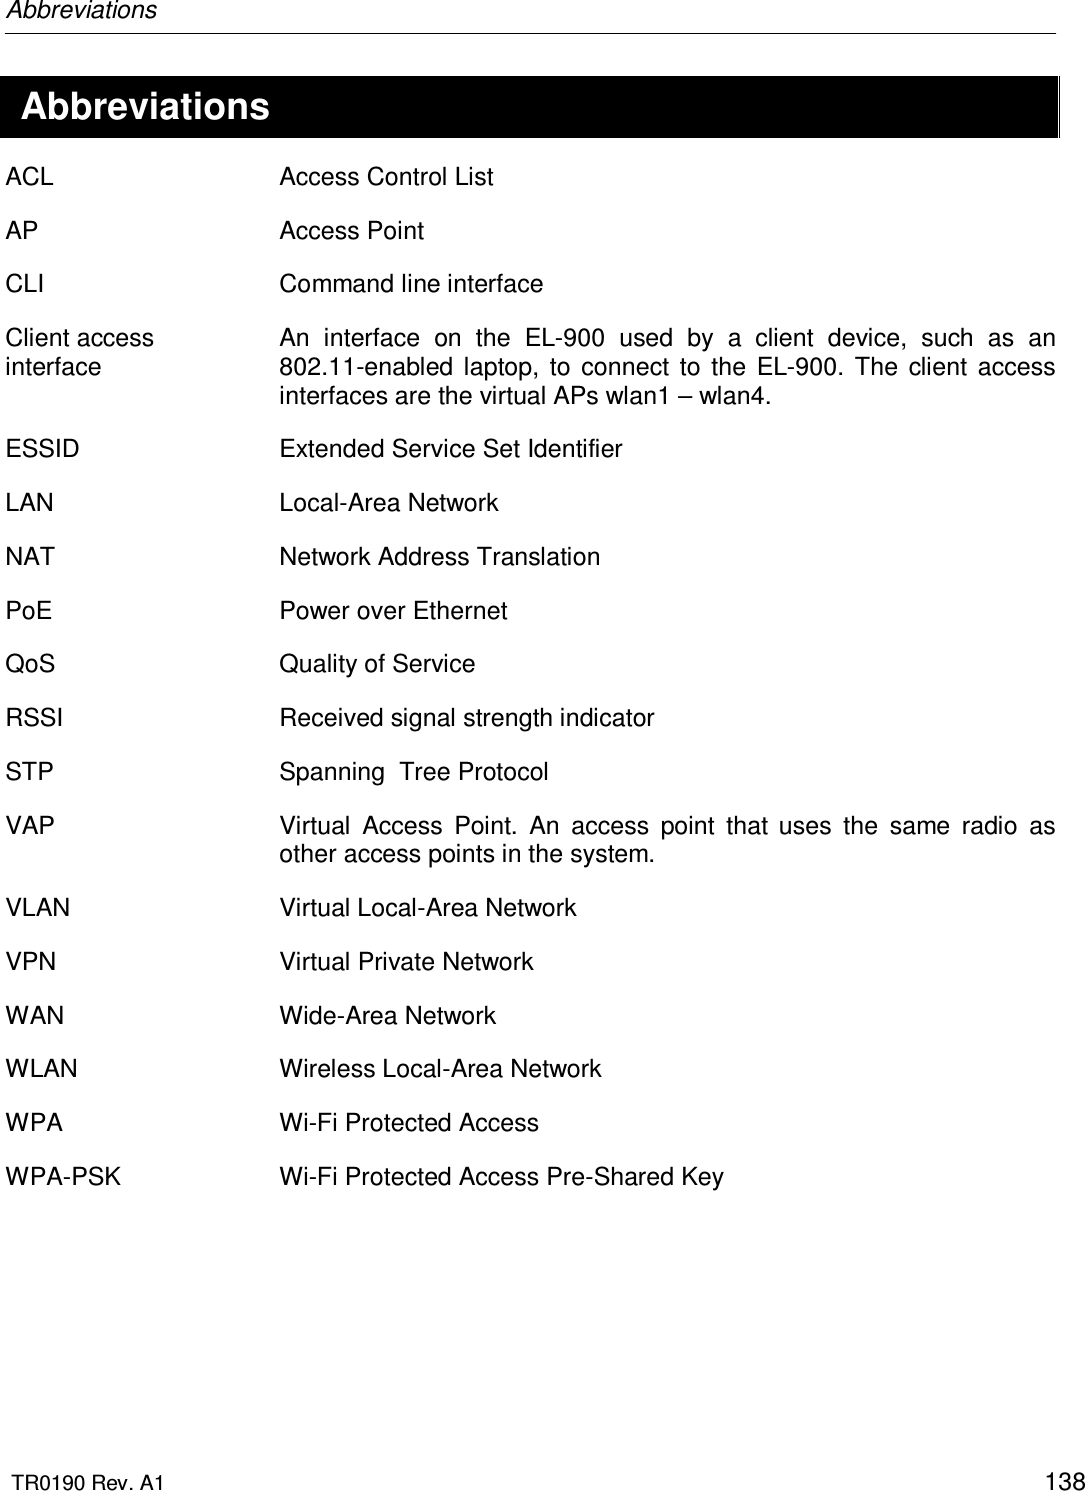 Abbreviations  TR0190 Rev. A1    138  Abbreviations ACL  Access Control List AP  Access Point CLI  Command line interface Client access interface An  interface  on  the  EL-900  used  by  a  client  device,  such  as  an 802.11-enabled  laptop,  to  connect  to  the  EL-900.  The  client  access interfaces are the virtual APs wlan1 – wlan4. ESSID  Extended Service Set Identifier LAN  Local-Area Network NAT  Network Address Translation PoE  Power over Ethernet QoS  Quality of Service RSSI  Received signal strength indicator STP  Spanning  Tree Protocol VAP  Virtual  Access  Point.  An  access  point  that  uses  the  same  radio  as other access points in the system. VLAN  Virtual Local-Area Network VPN  Virtual Private Network WAN  Wide-Area Network WLAN  Wireless Local-Area Network WPA  Wi-Fi Protected Access WPA-PSK  Wi-Fi Protected Access Pre-Shared Key   